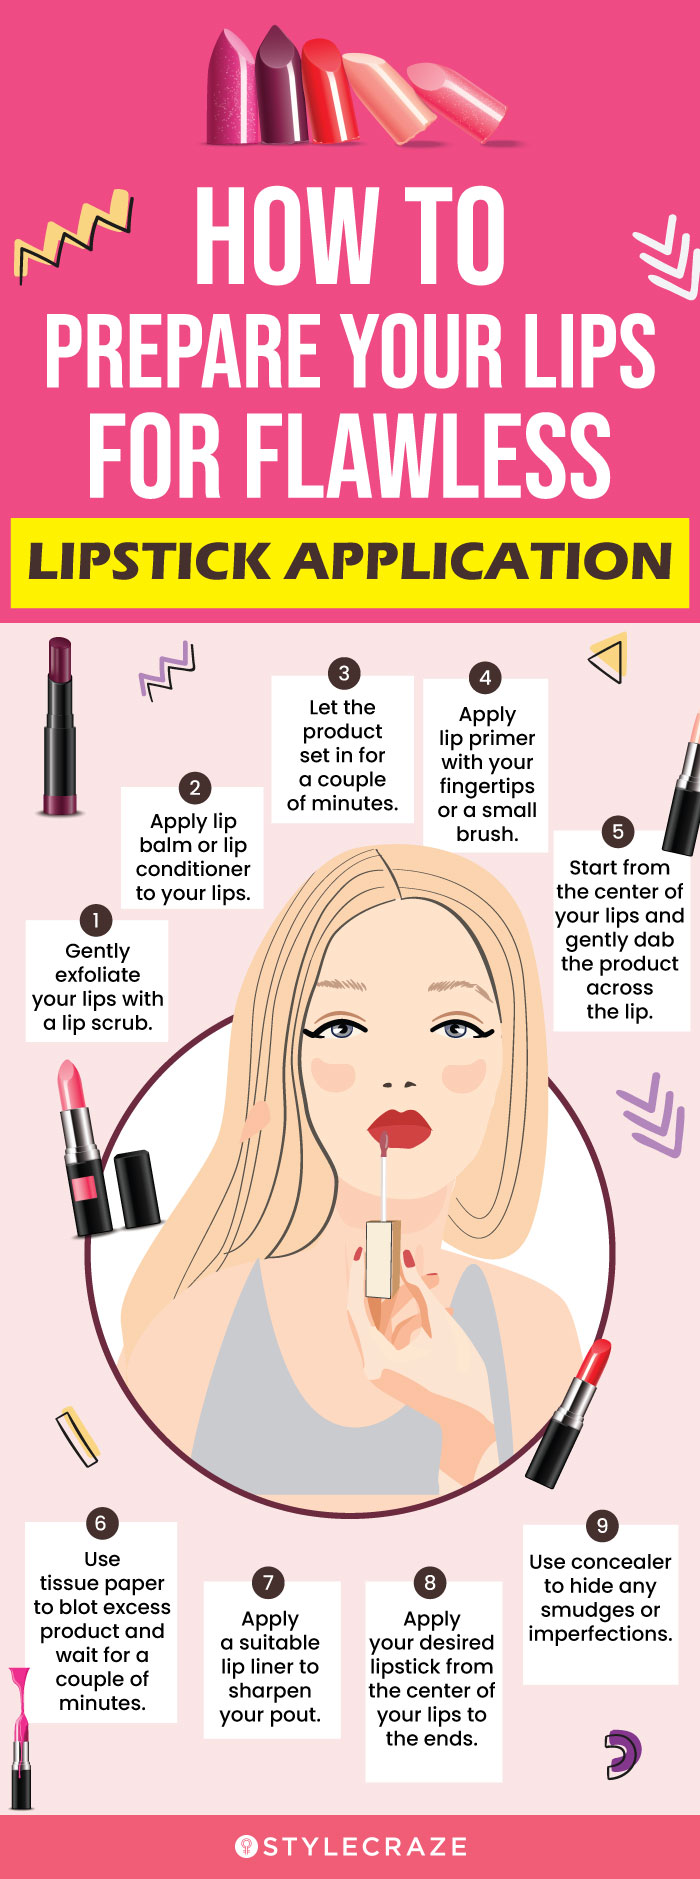 How To Prepare Your Lips For Flawless Lipstick Application (infographic)